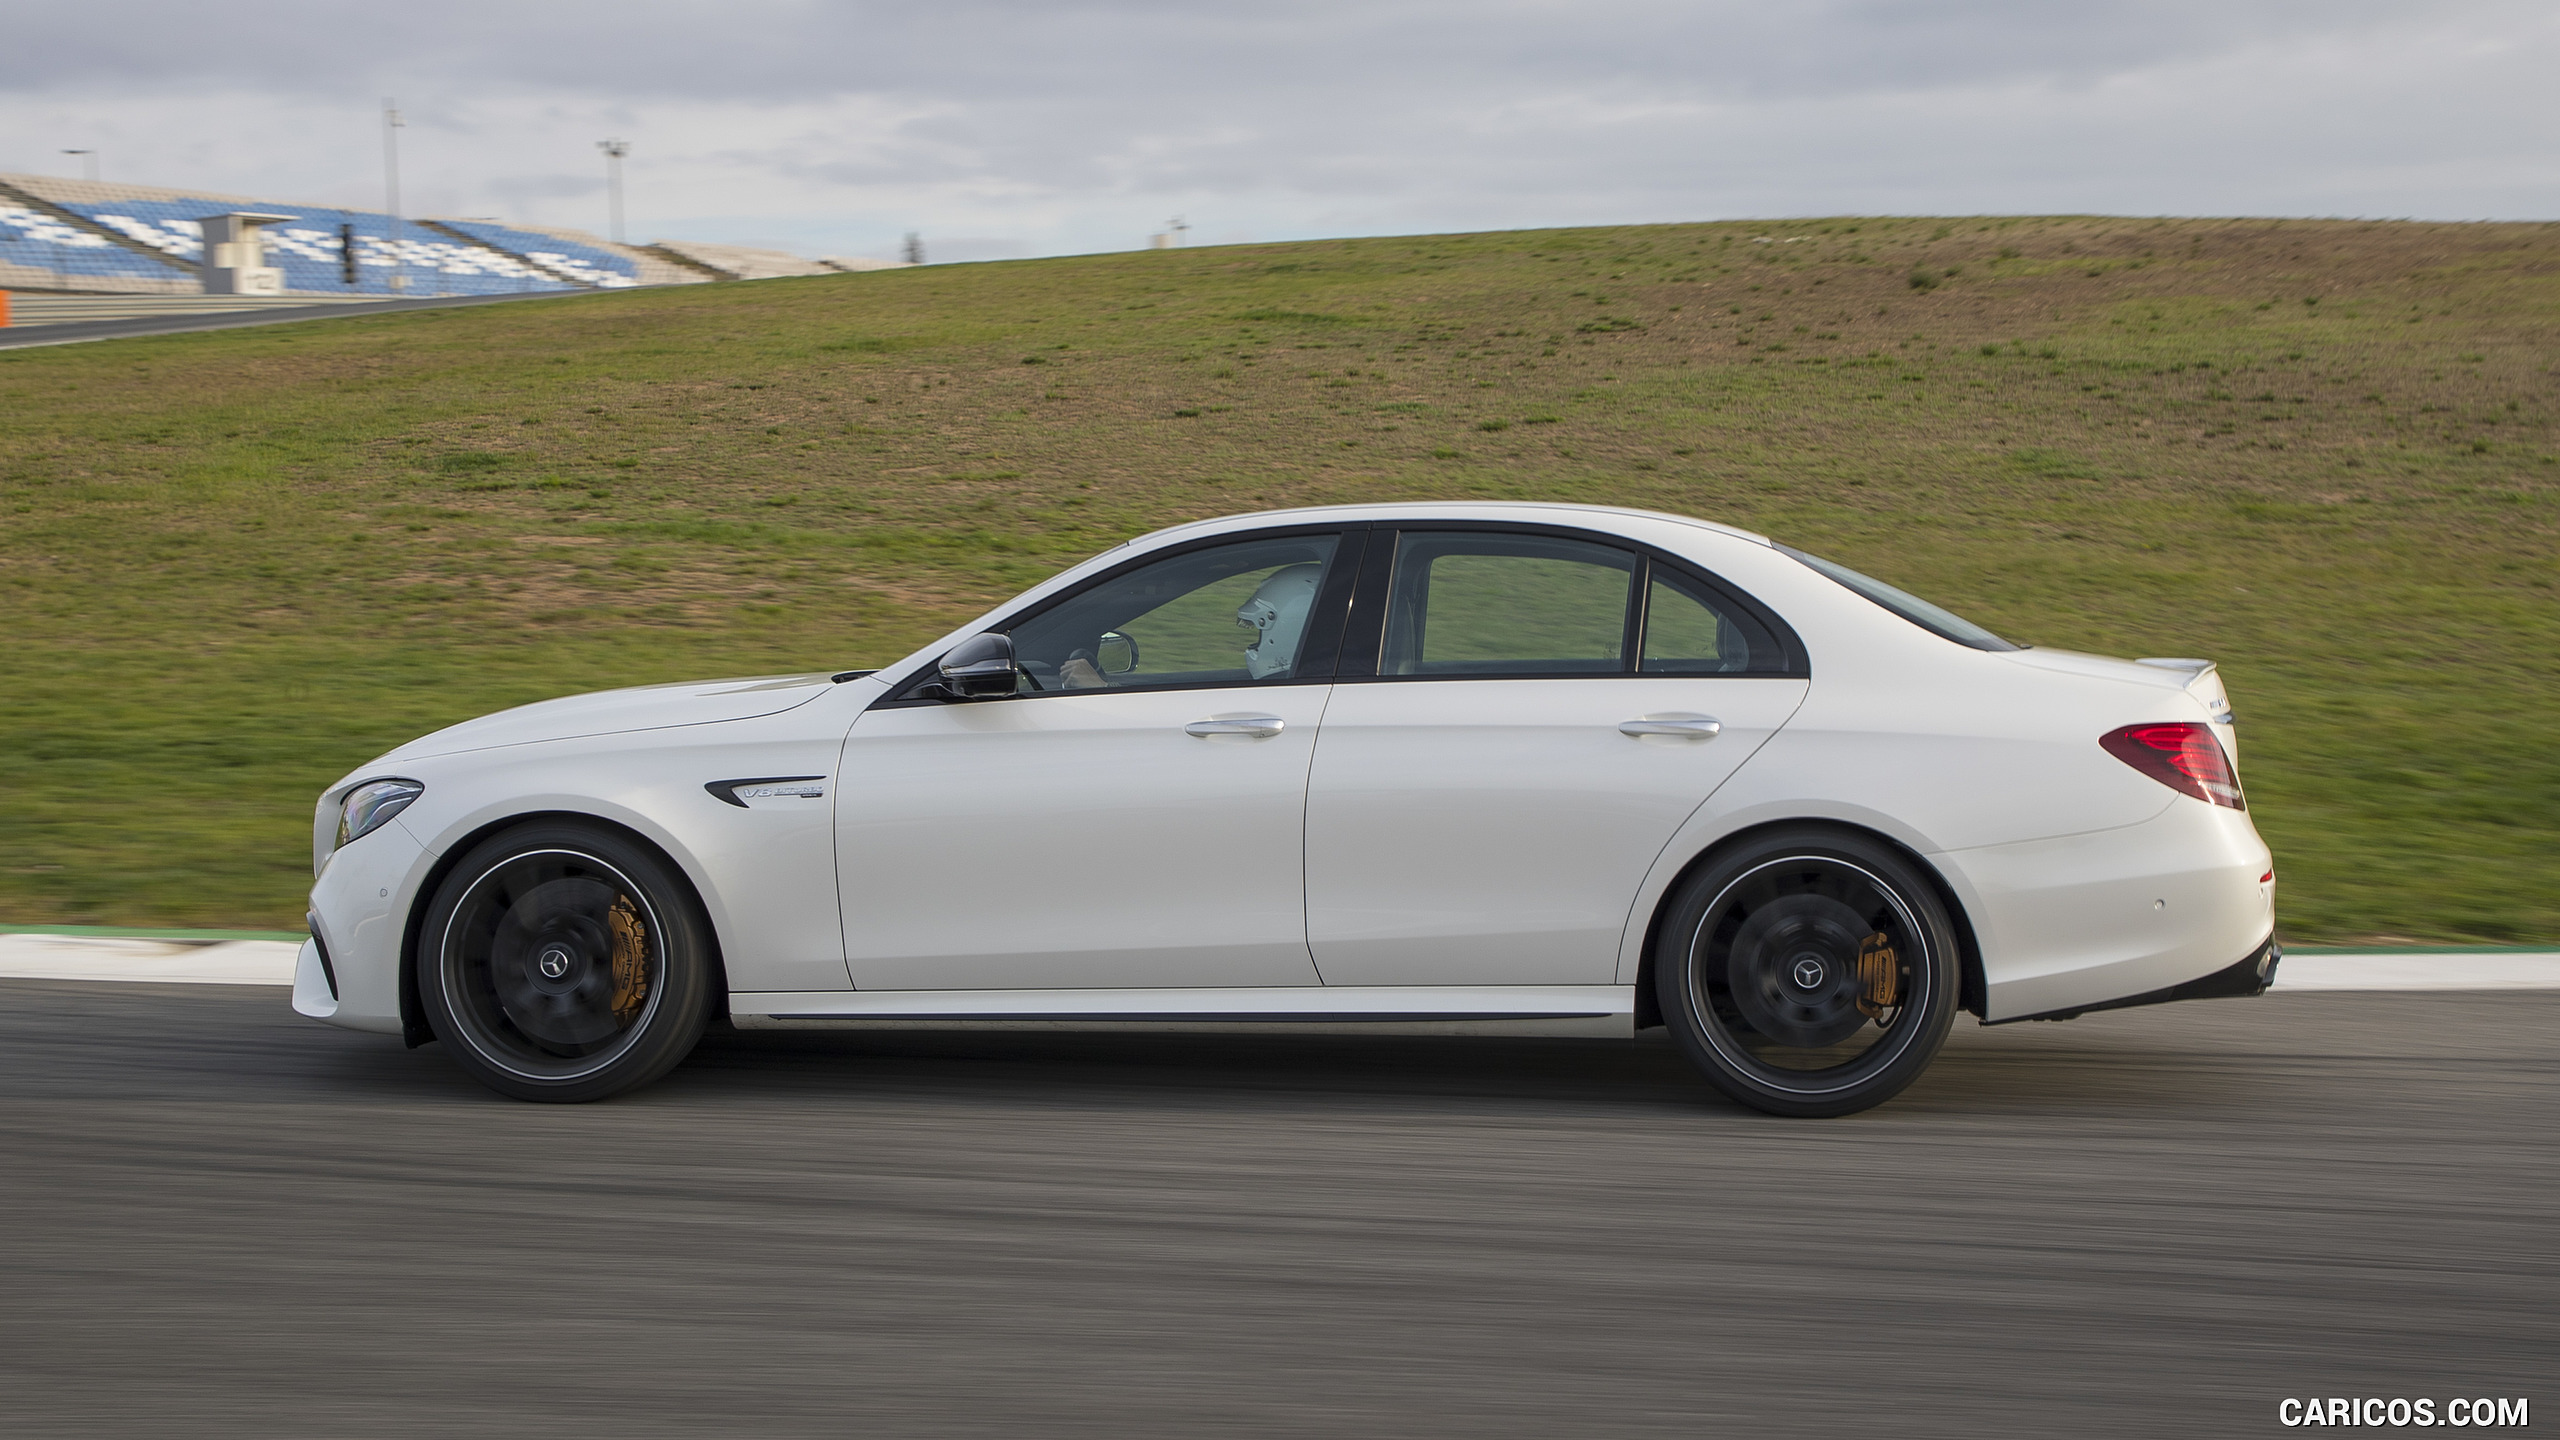 2018 Mercedes-AMG E63 S 4MATIC+ - Side, #122 of 323